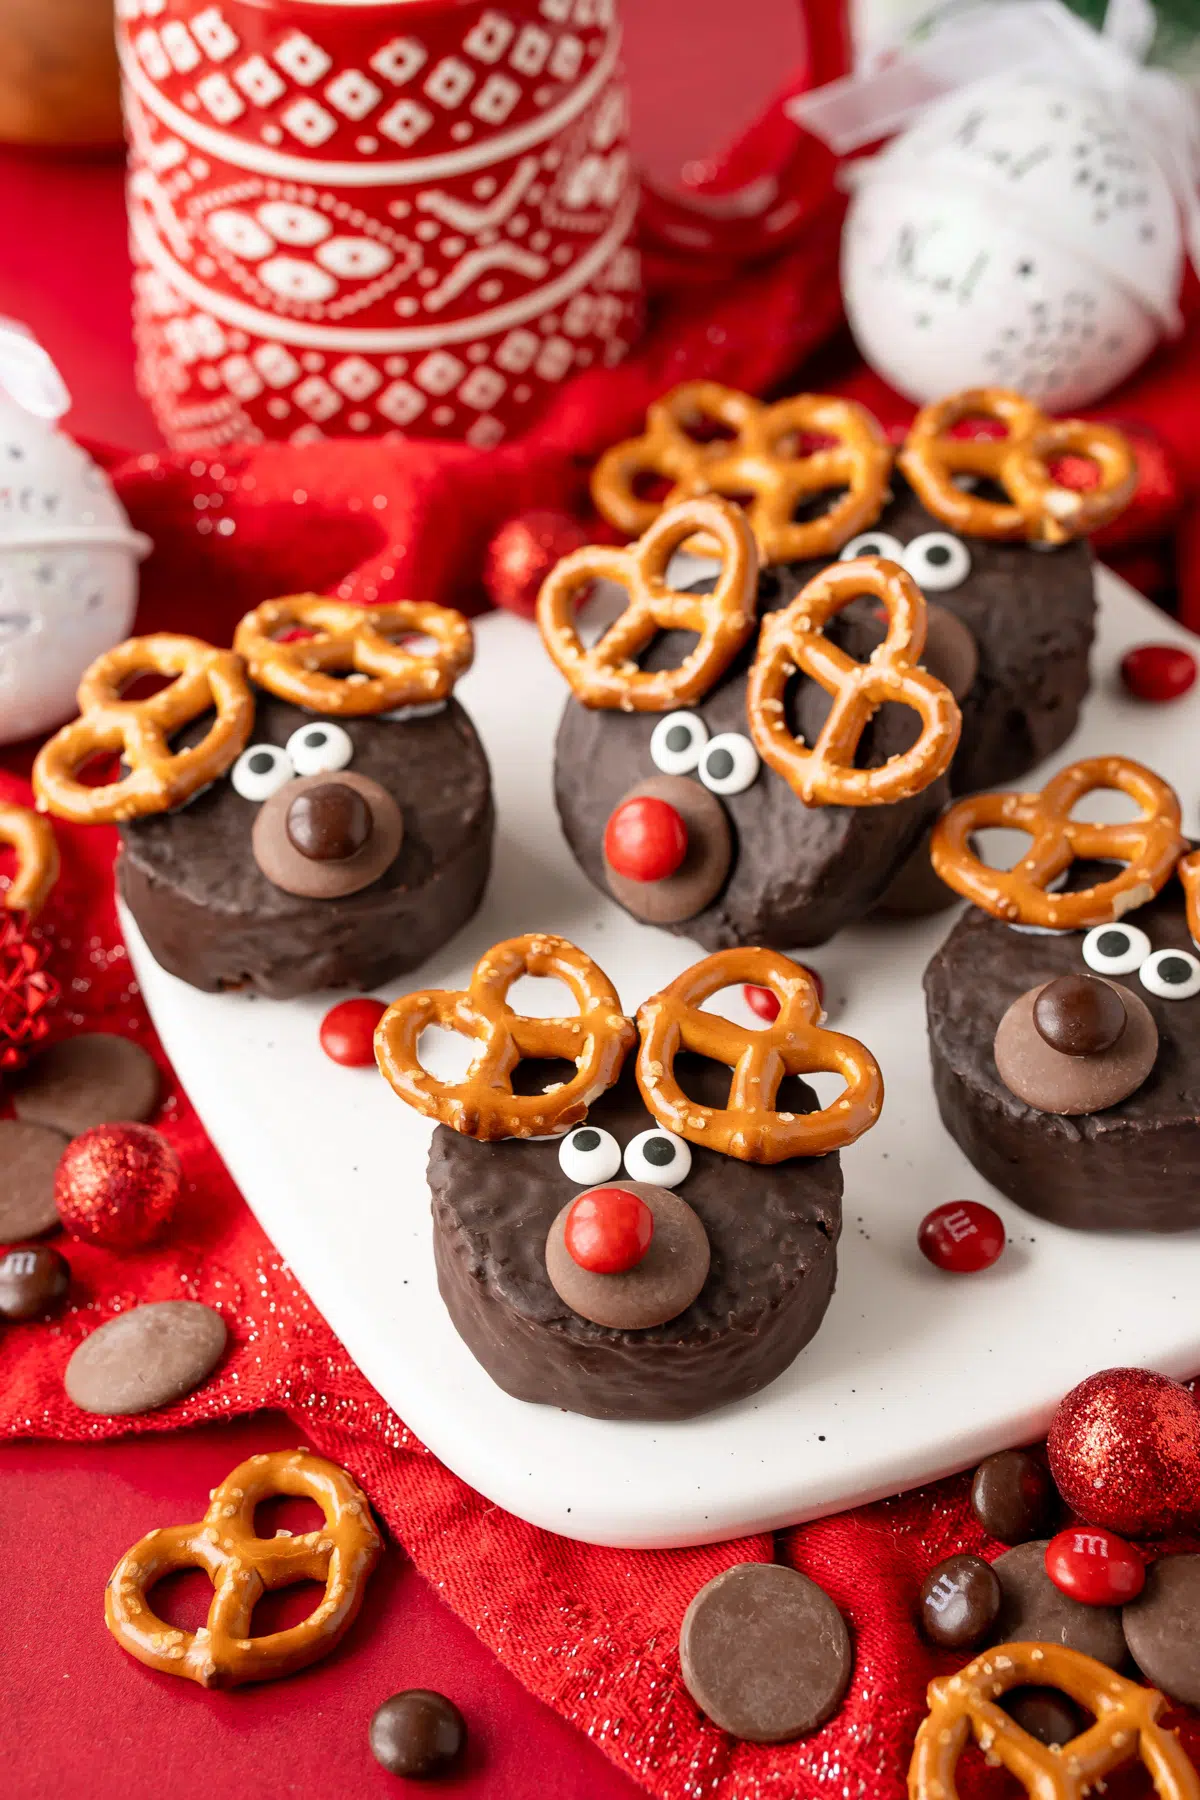 Miniature cakes fashioned to look like a reindeer with candy eyes, candy melts, m&m's, and pretzels.